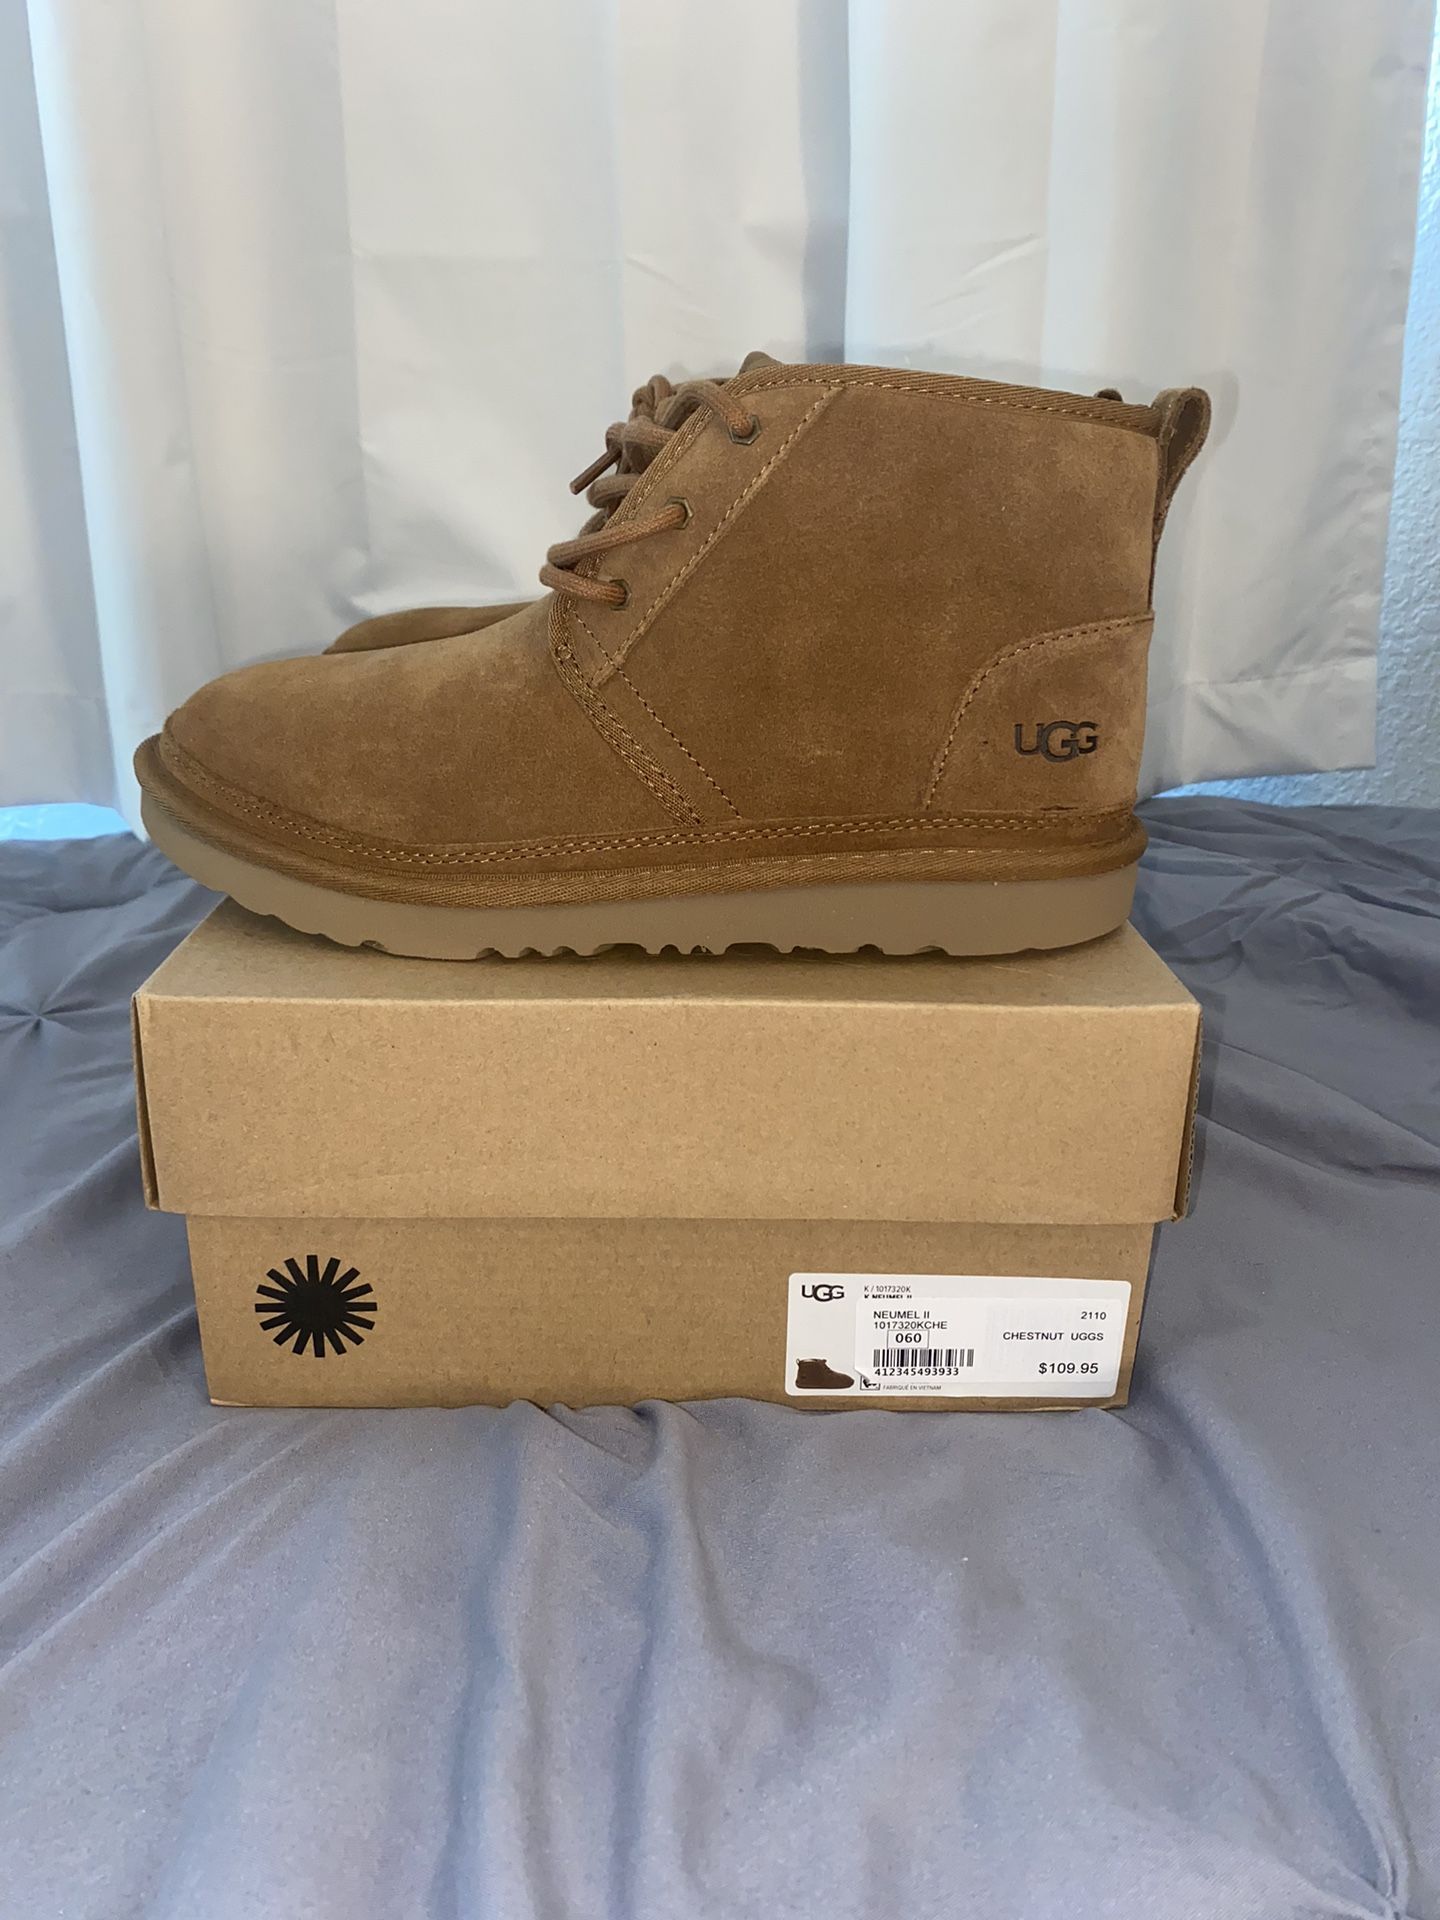 New Chestnut Ugg Boots Size 6M